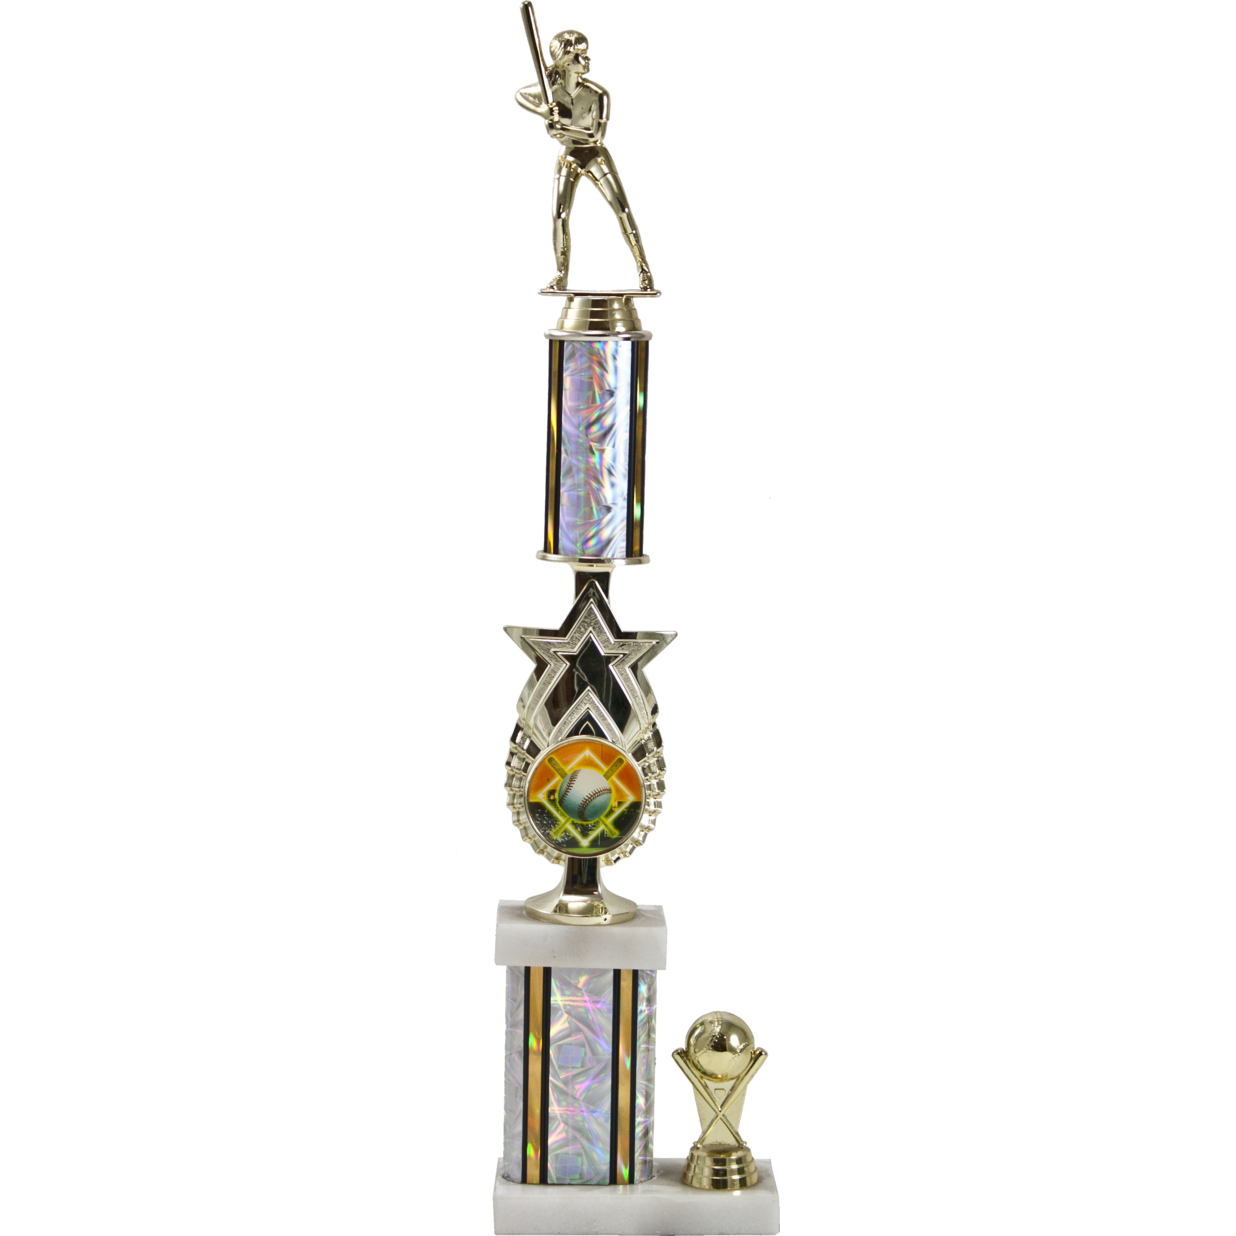 Two-Tier Trophy with Star Riser